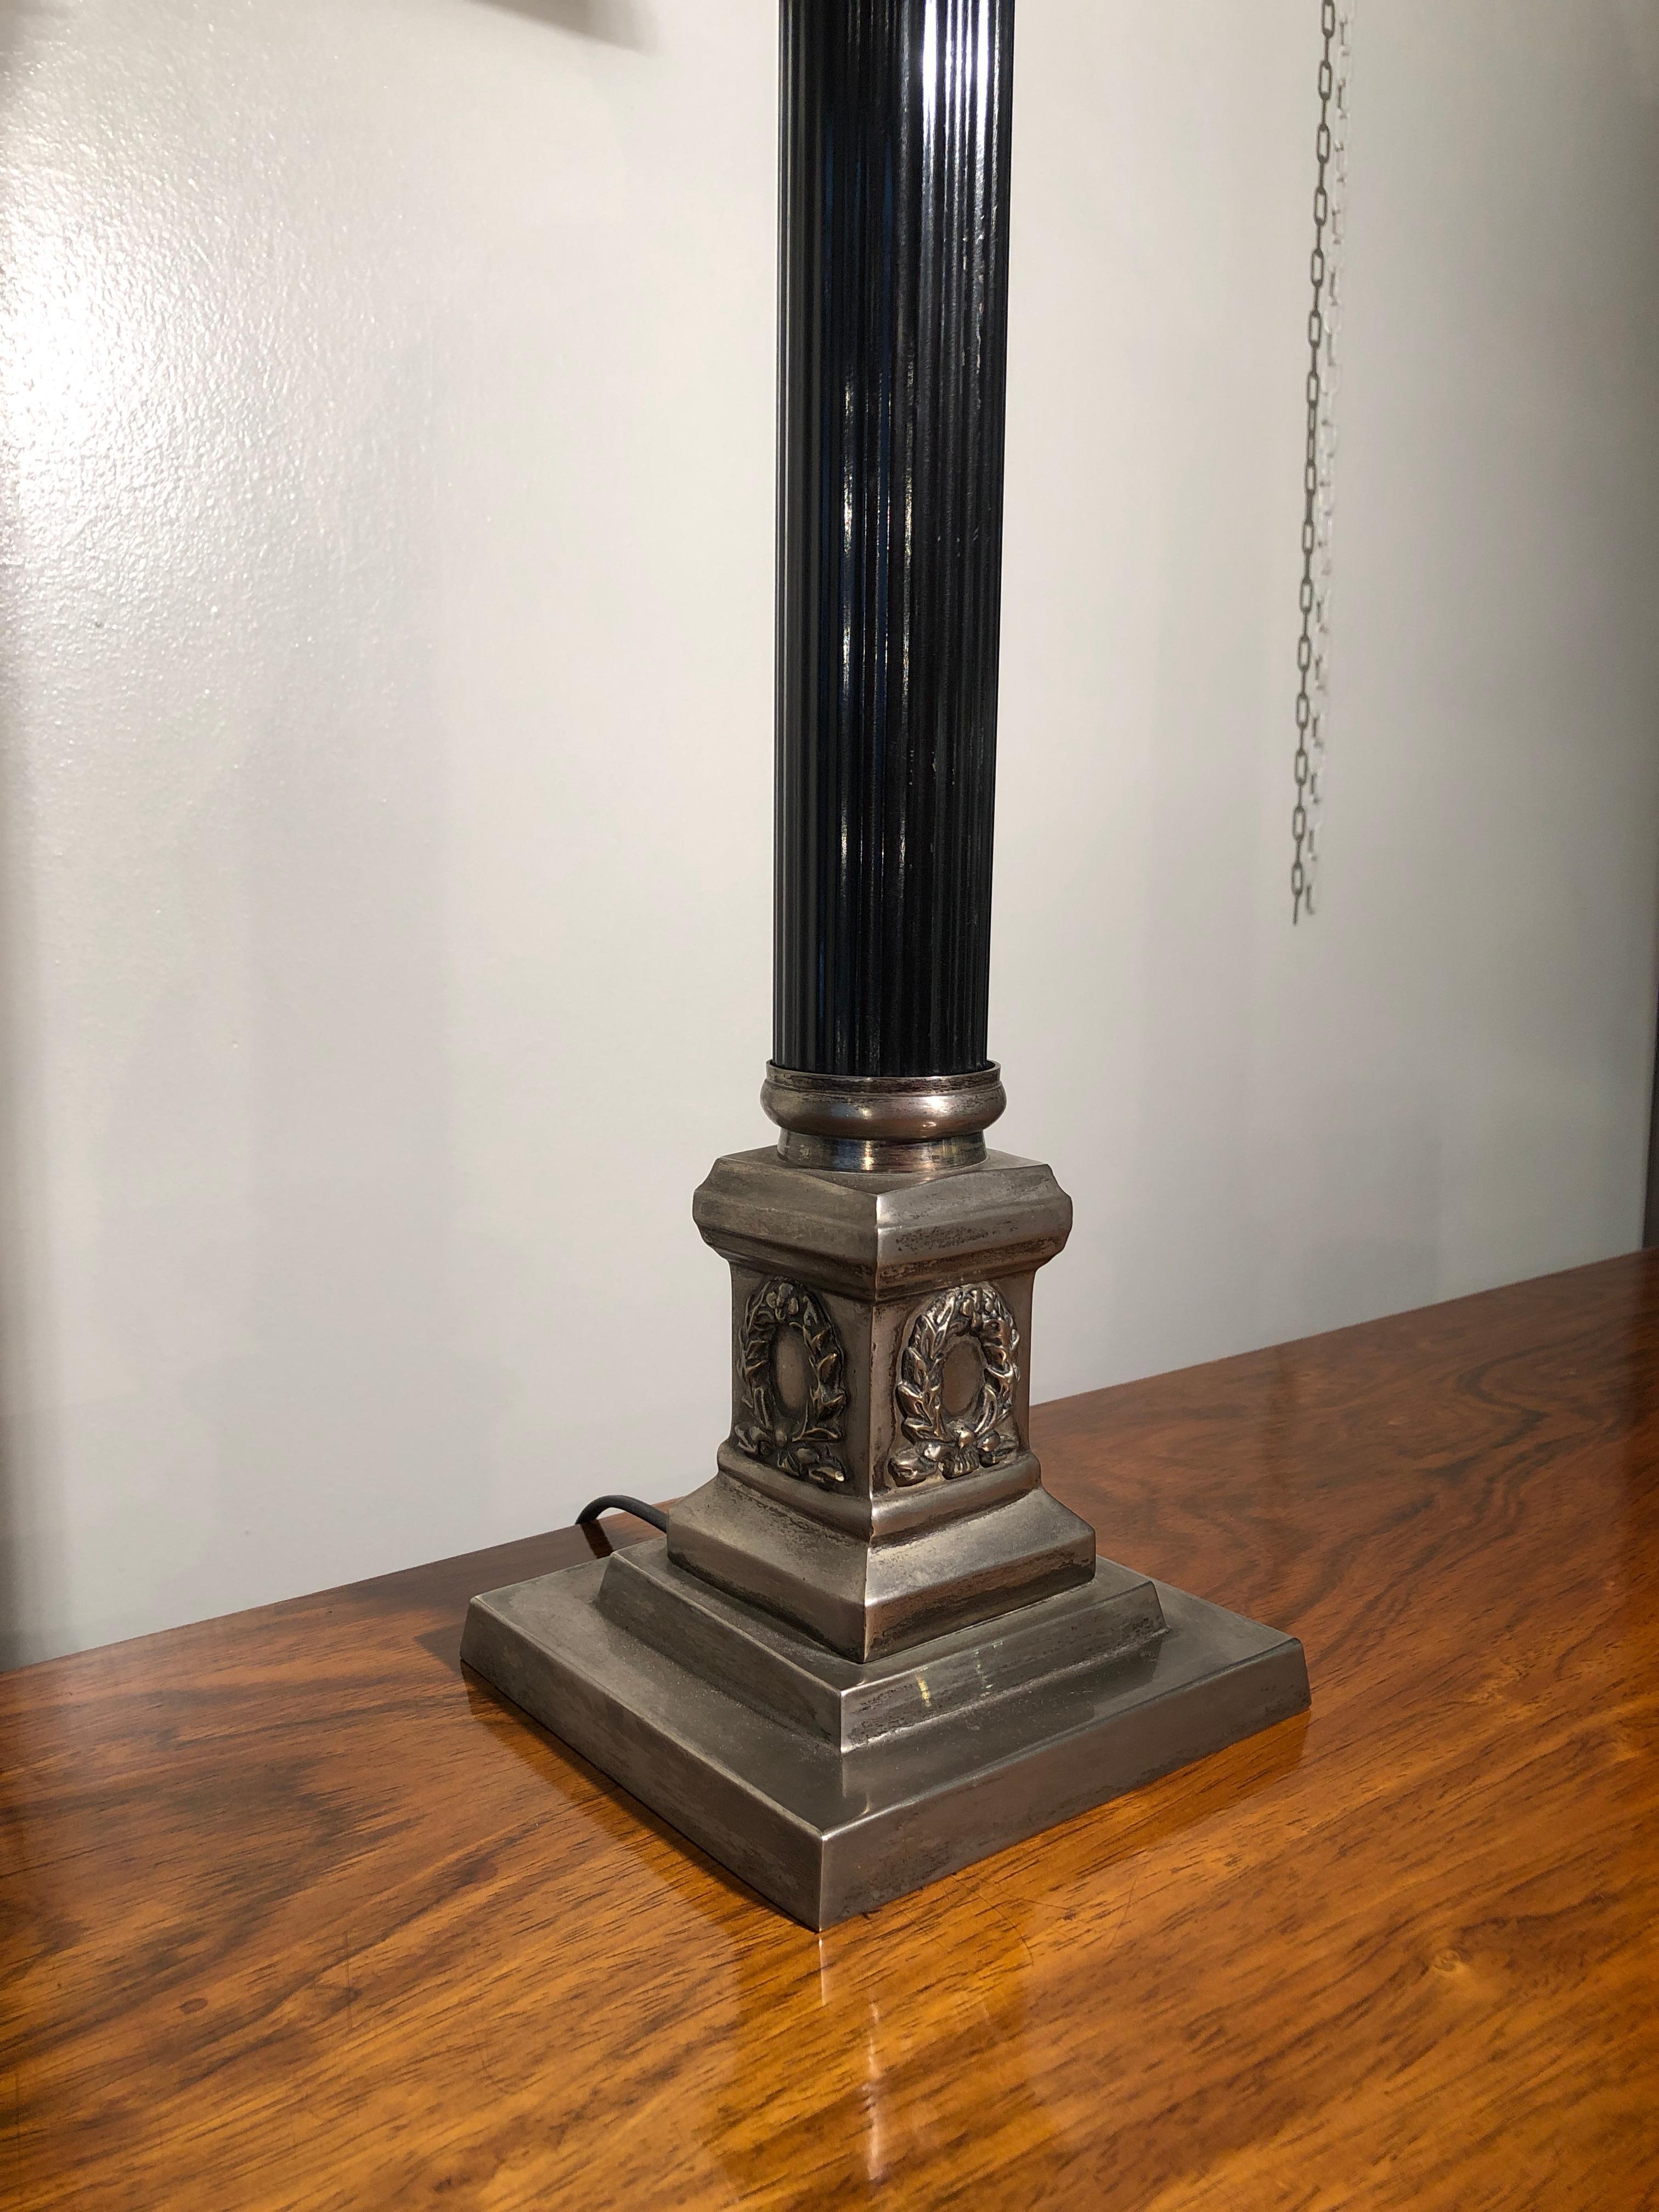 Empire style silvered and black engraved metal table lamp, France, early 20th century, 1930s

In the pictures you see two lamps but only one left.

Table lamp with metal black lacquered central metal body and finely engraved silvered endings.